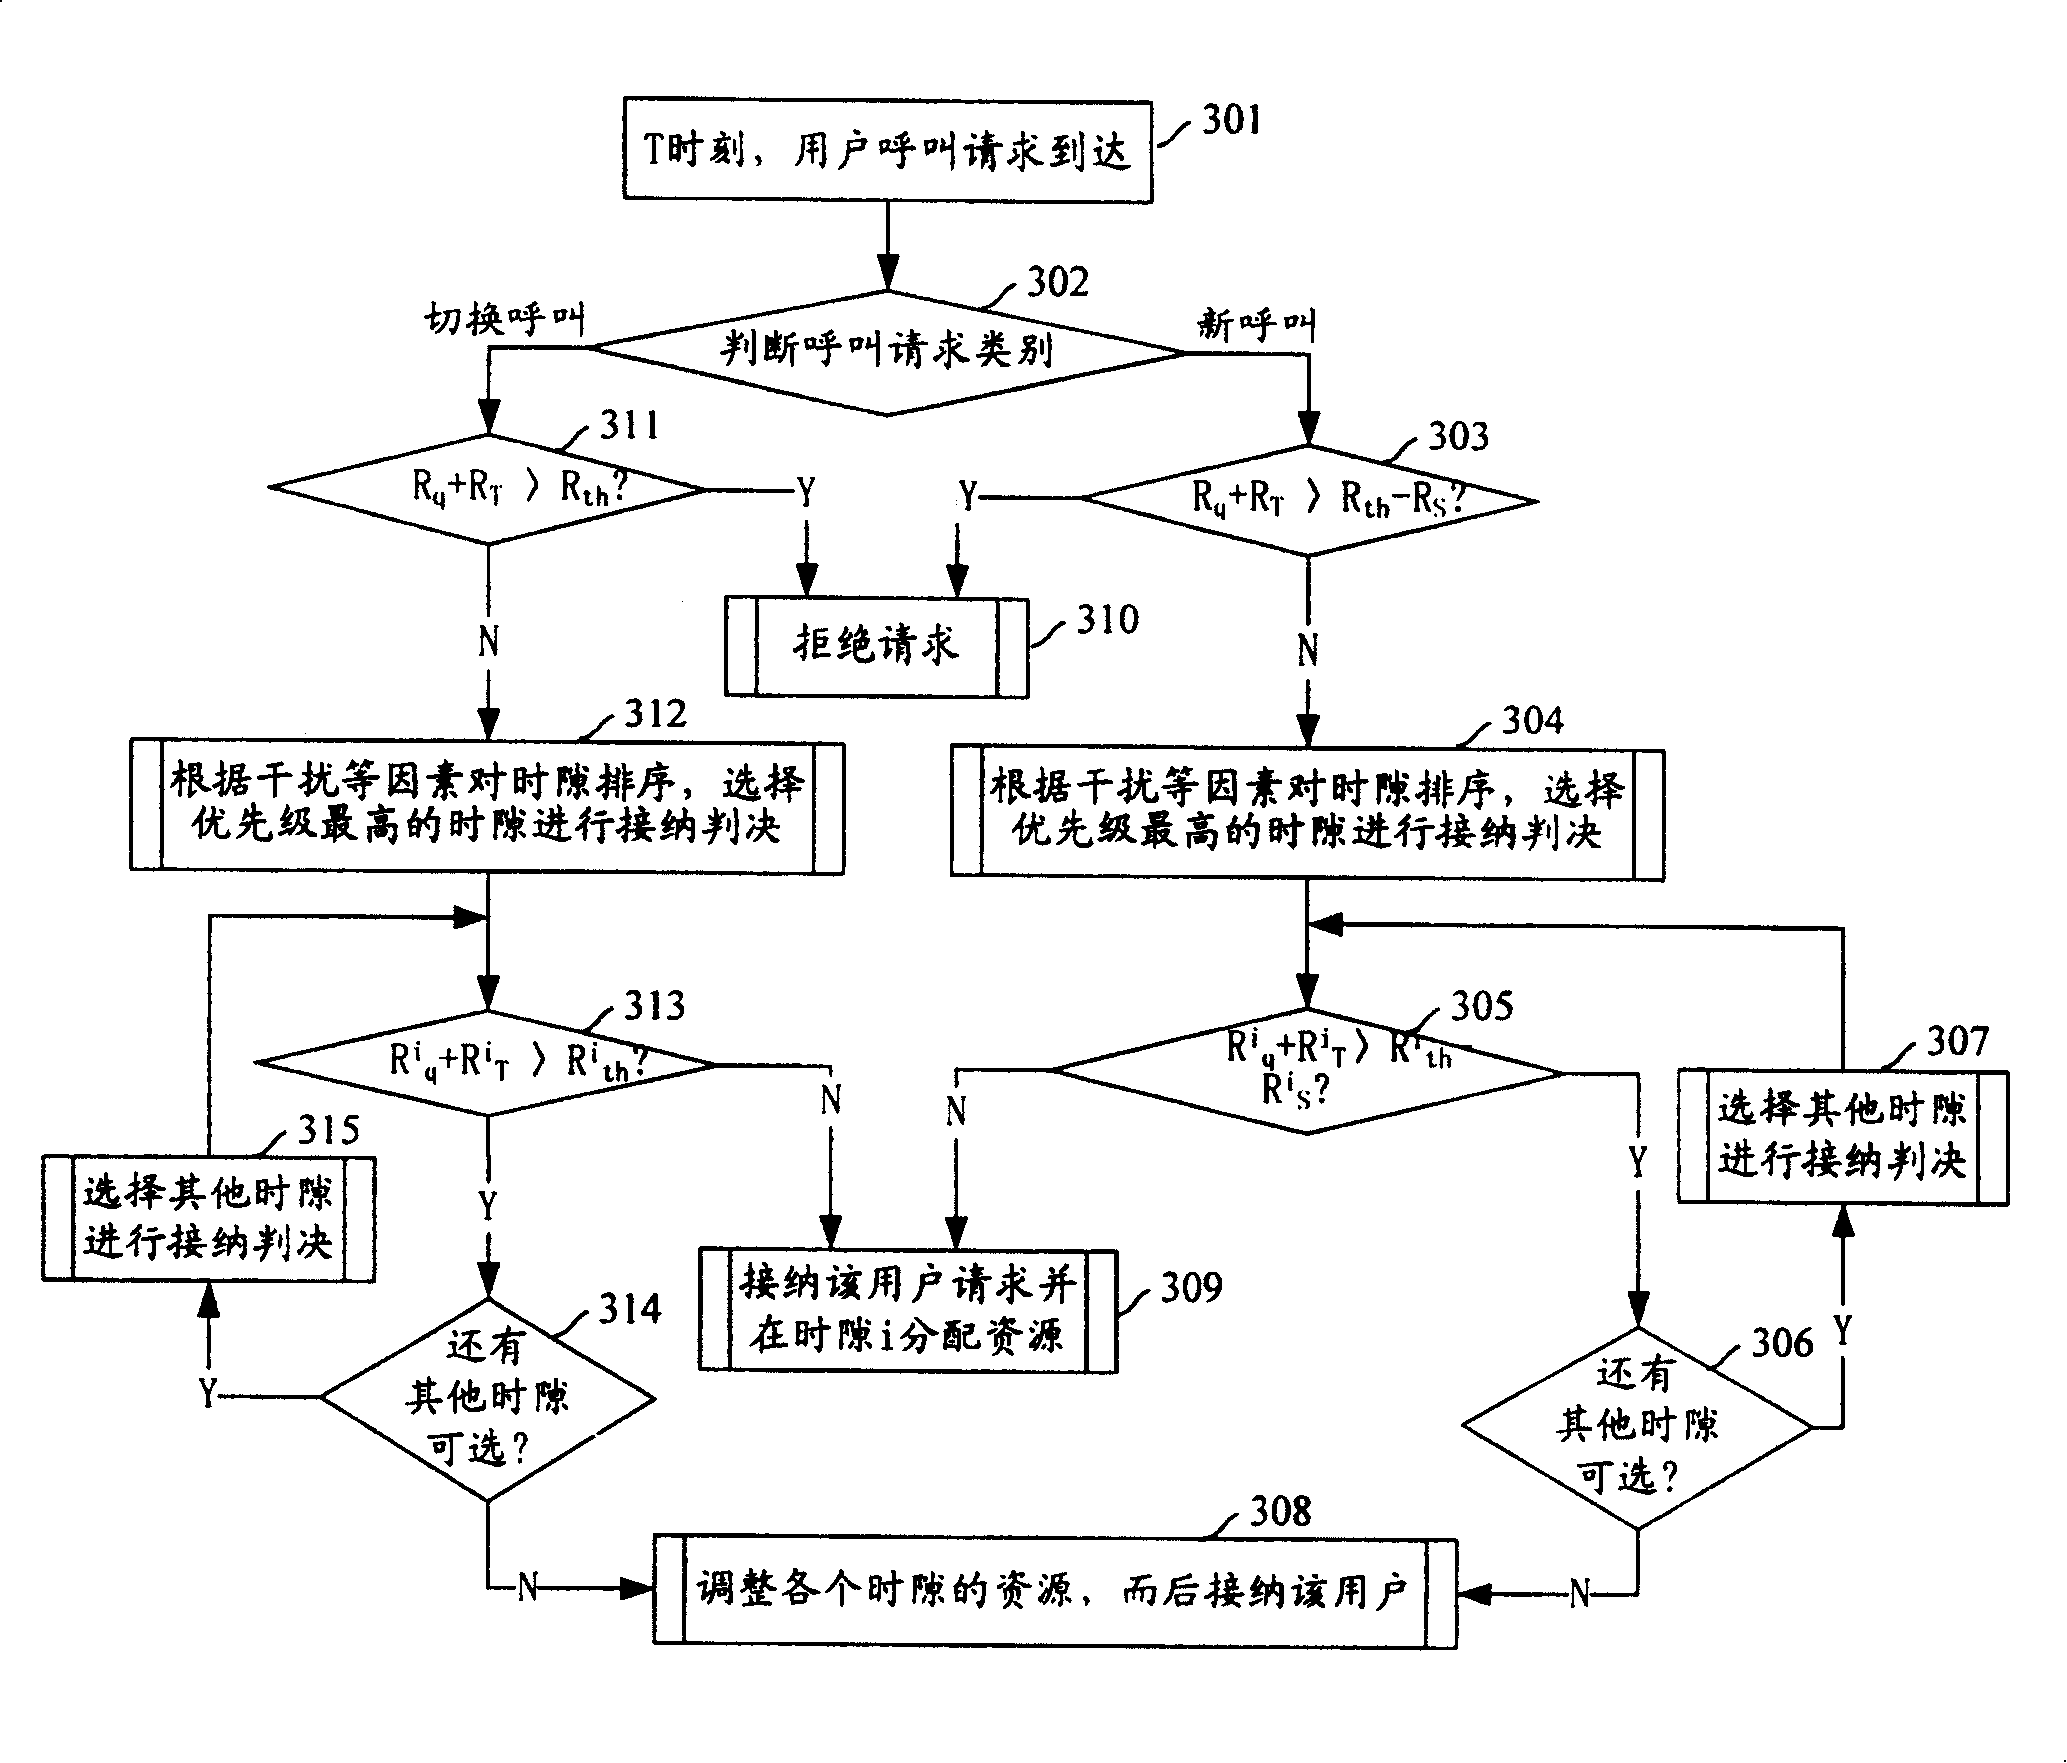 Implementation method for switching arranged resources in mobile communication system